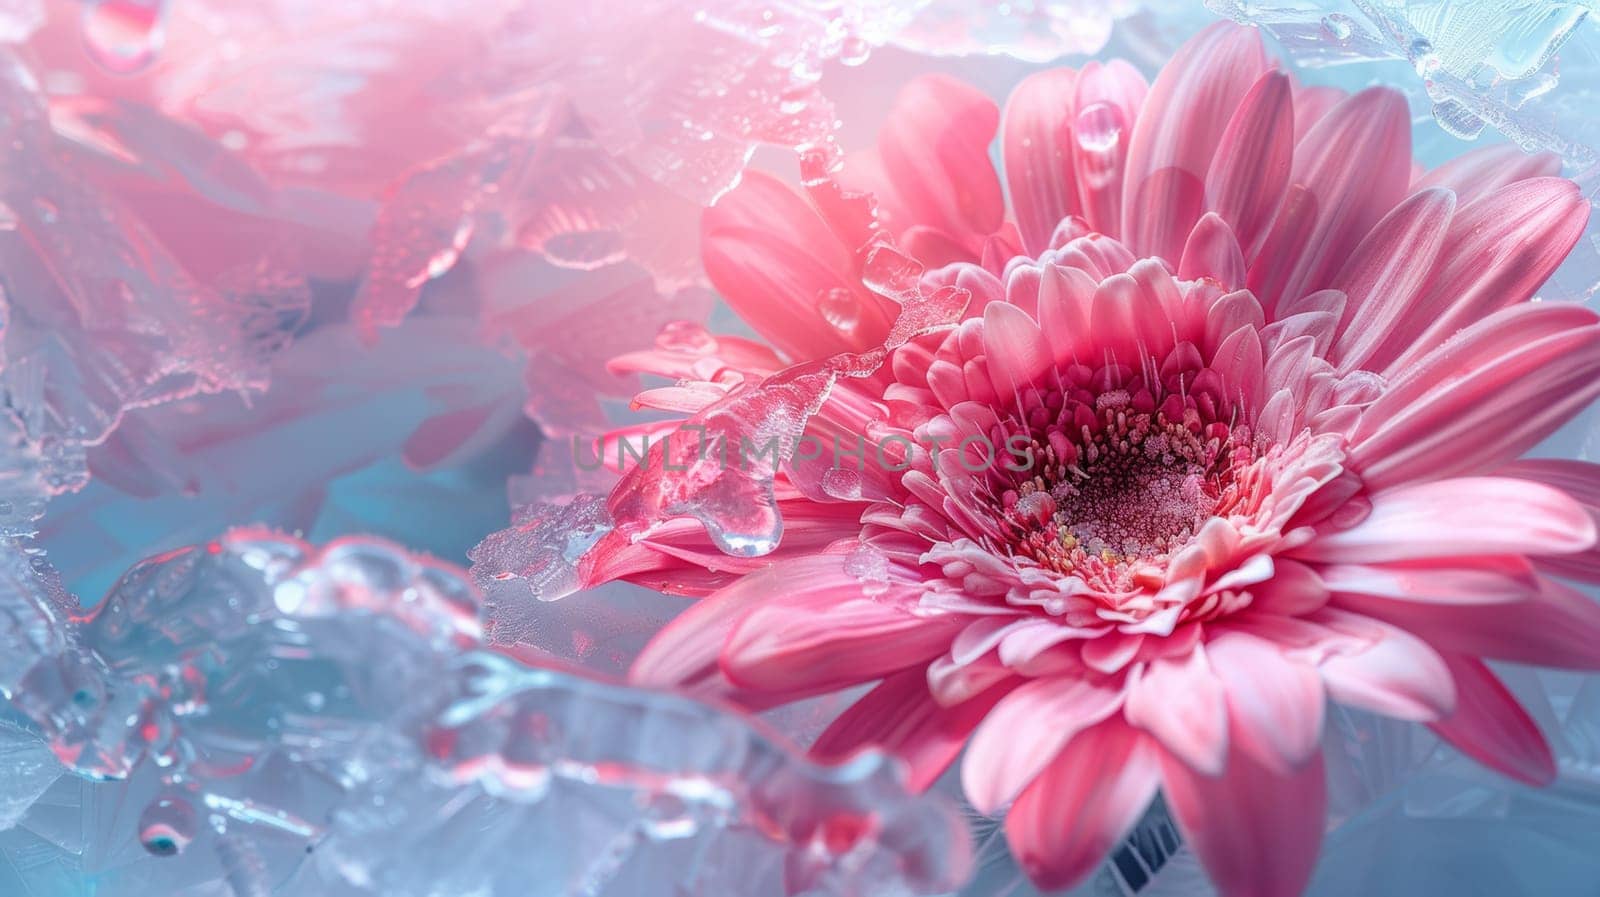 Pink gerbera flower with water droplets and ice crystals by Anastasiia